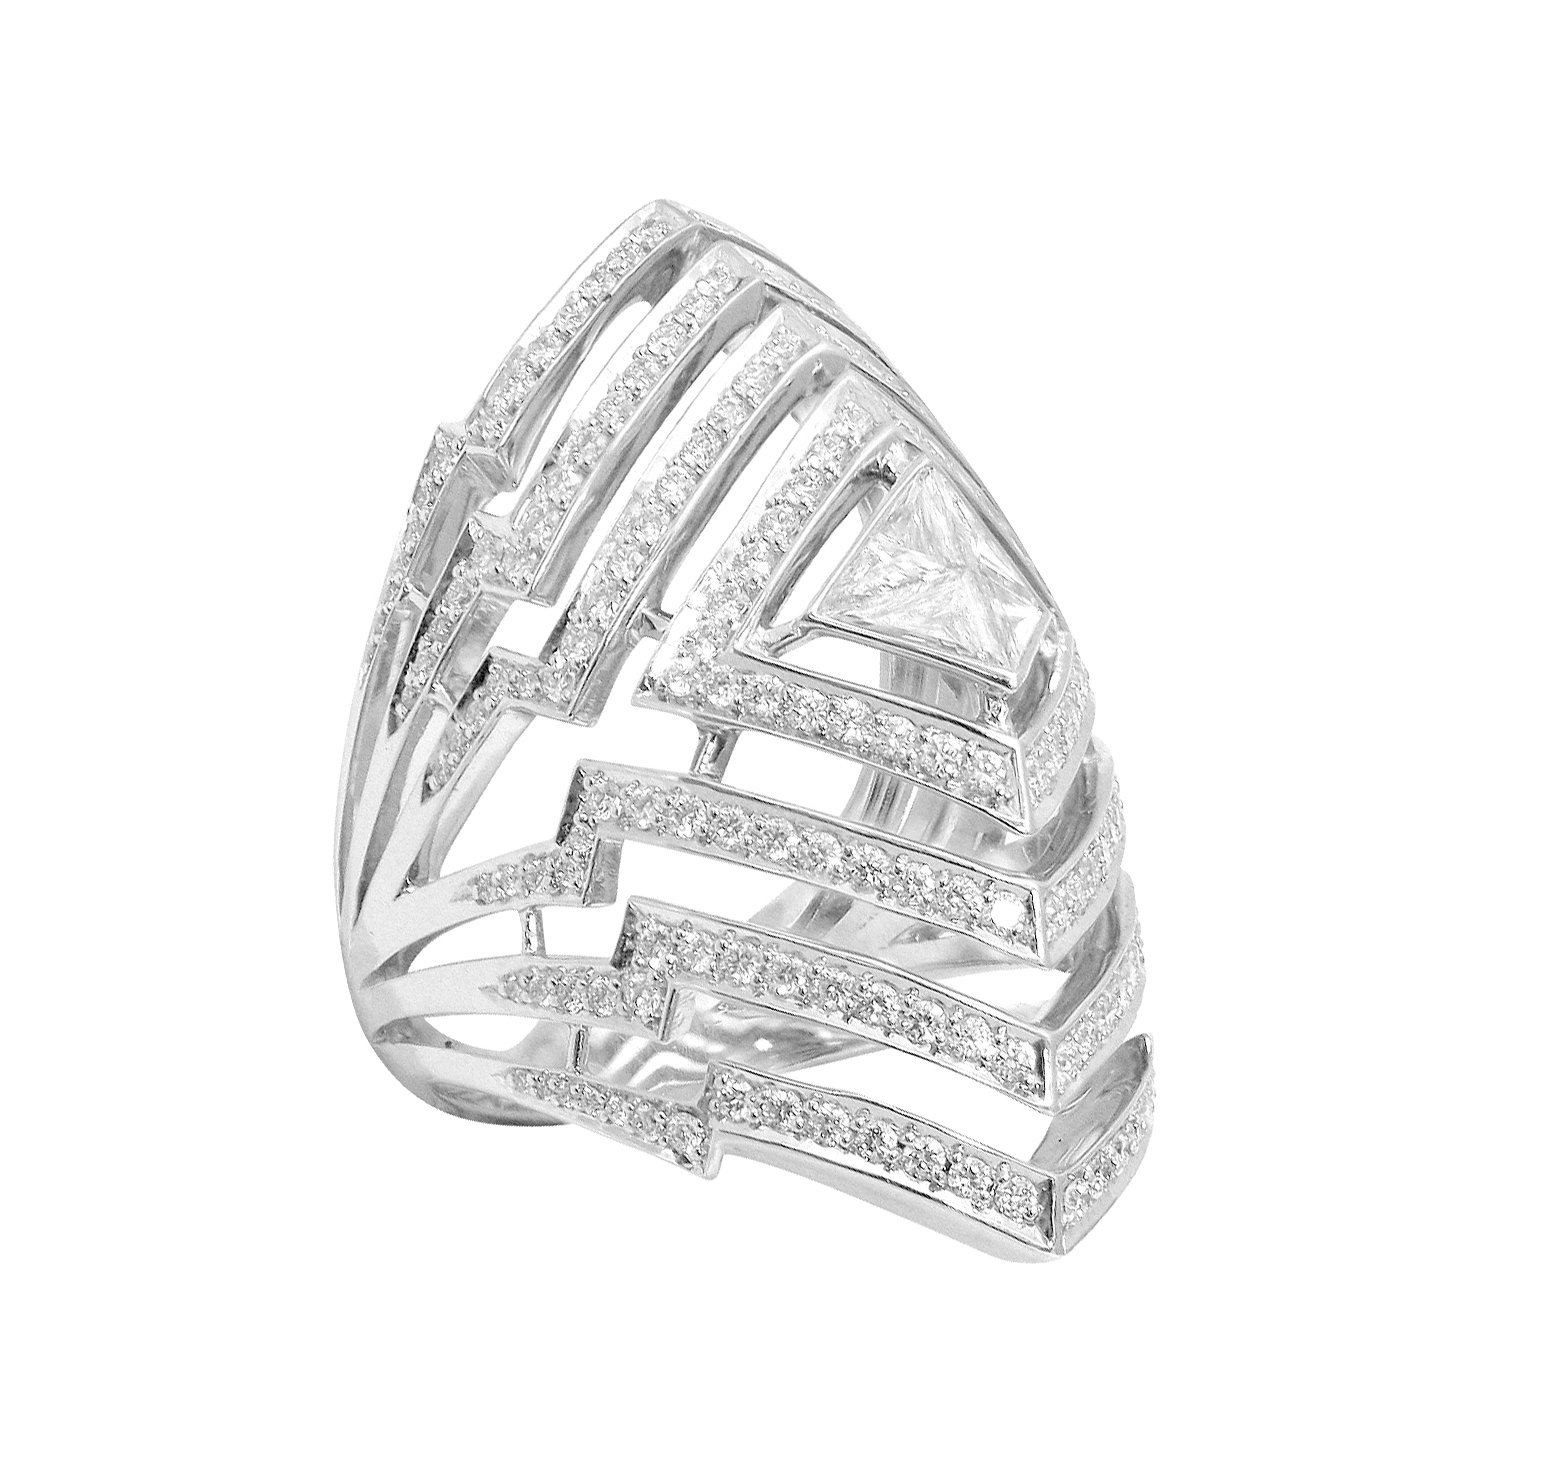 Lady Stardust Cocktail Ring with White Diamonds in 18kt White Gold - Size 7